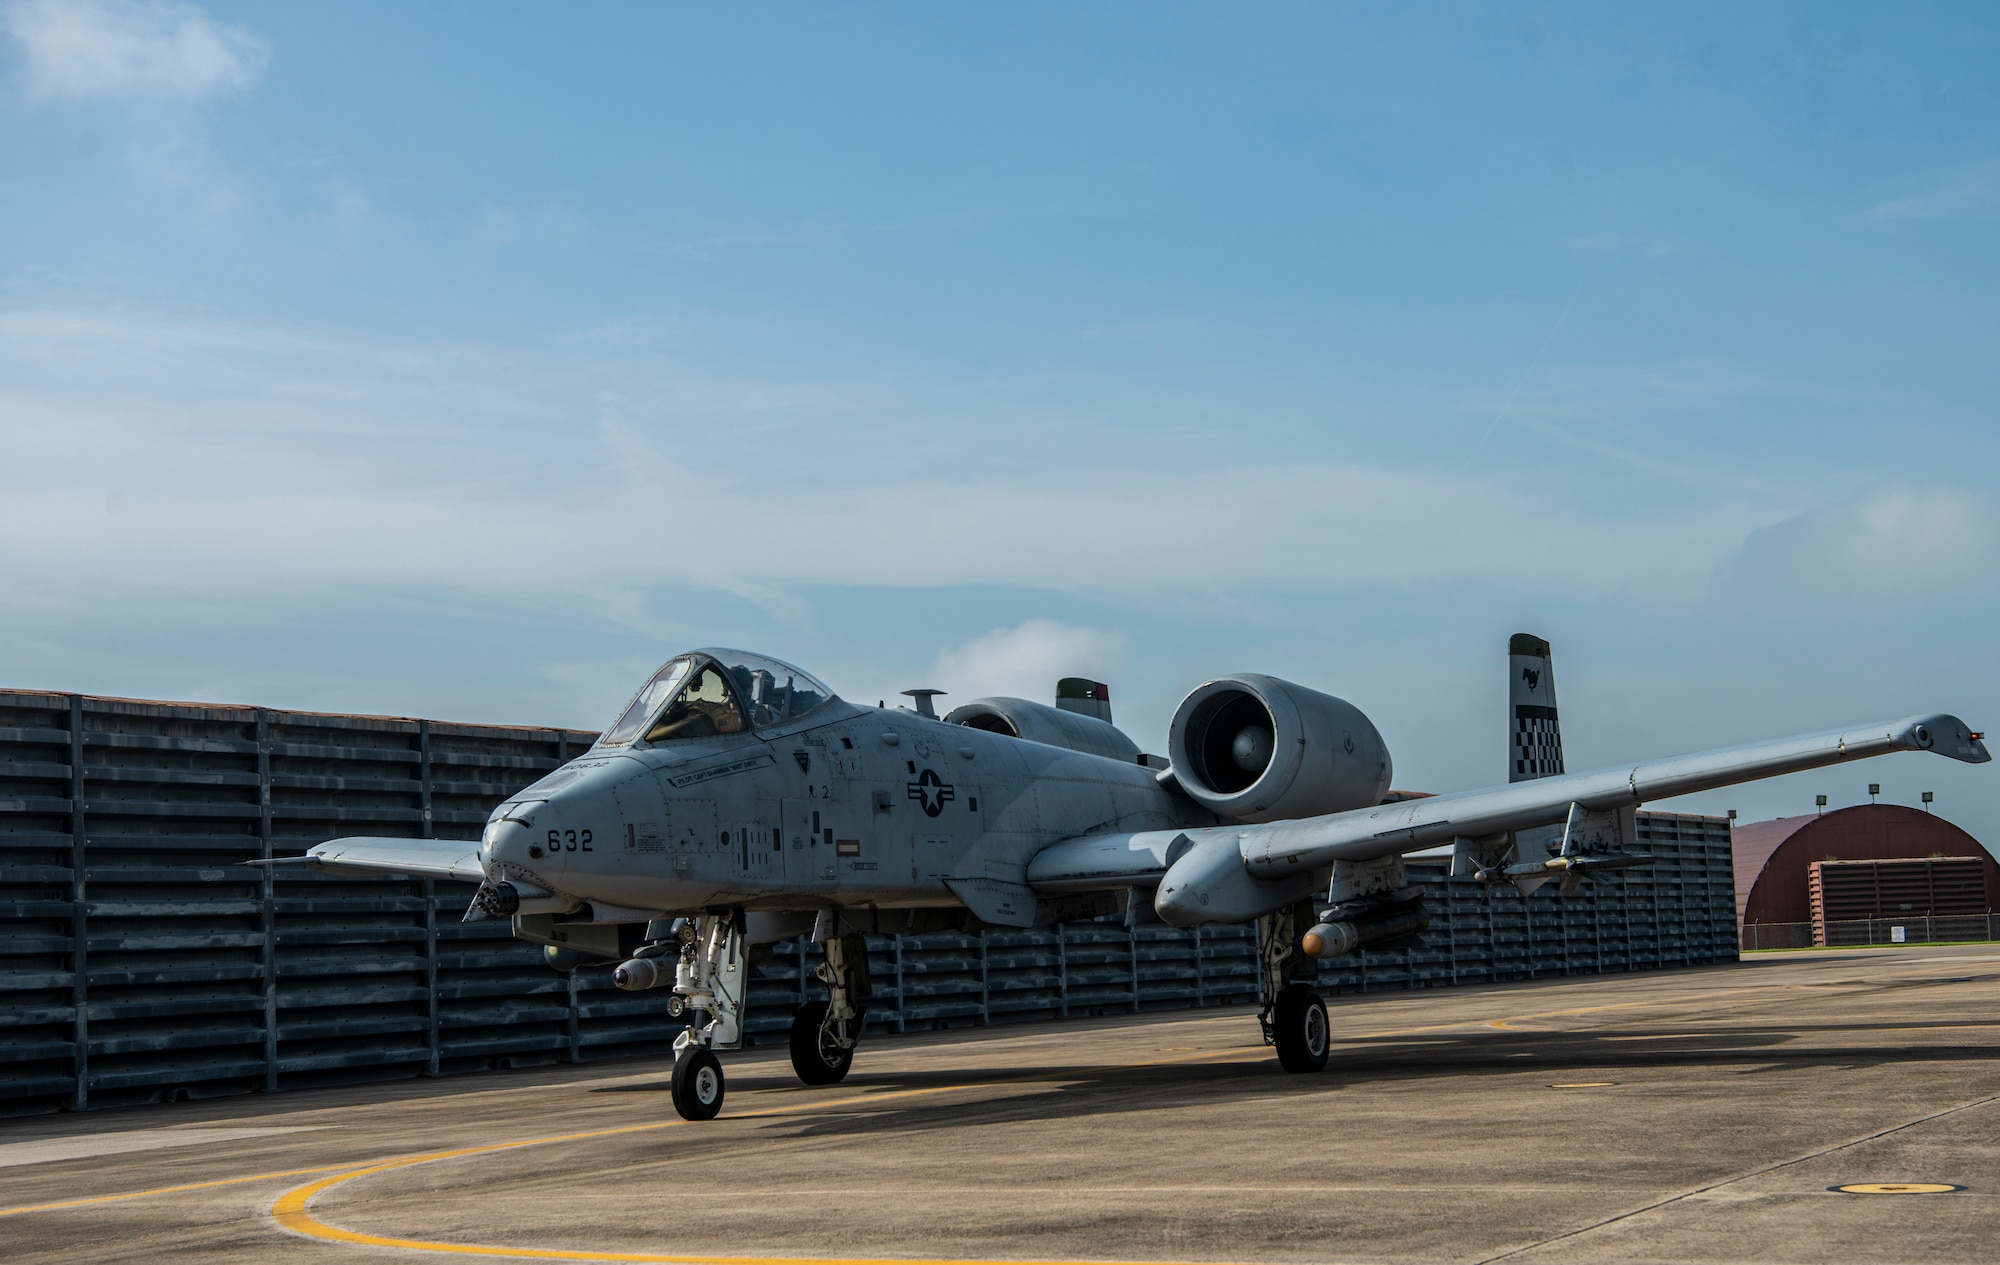 An A-10C Thunderbolt II assigned to the 25th Fighter Squadron taxis on the flight line after landing during a training sortie at Gwangju Air Base, Republic of Korea, Aug. 18, 2022.